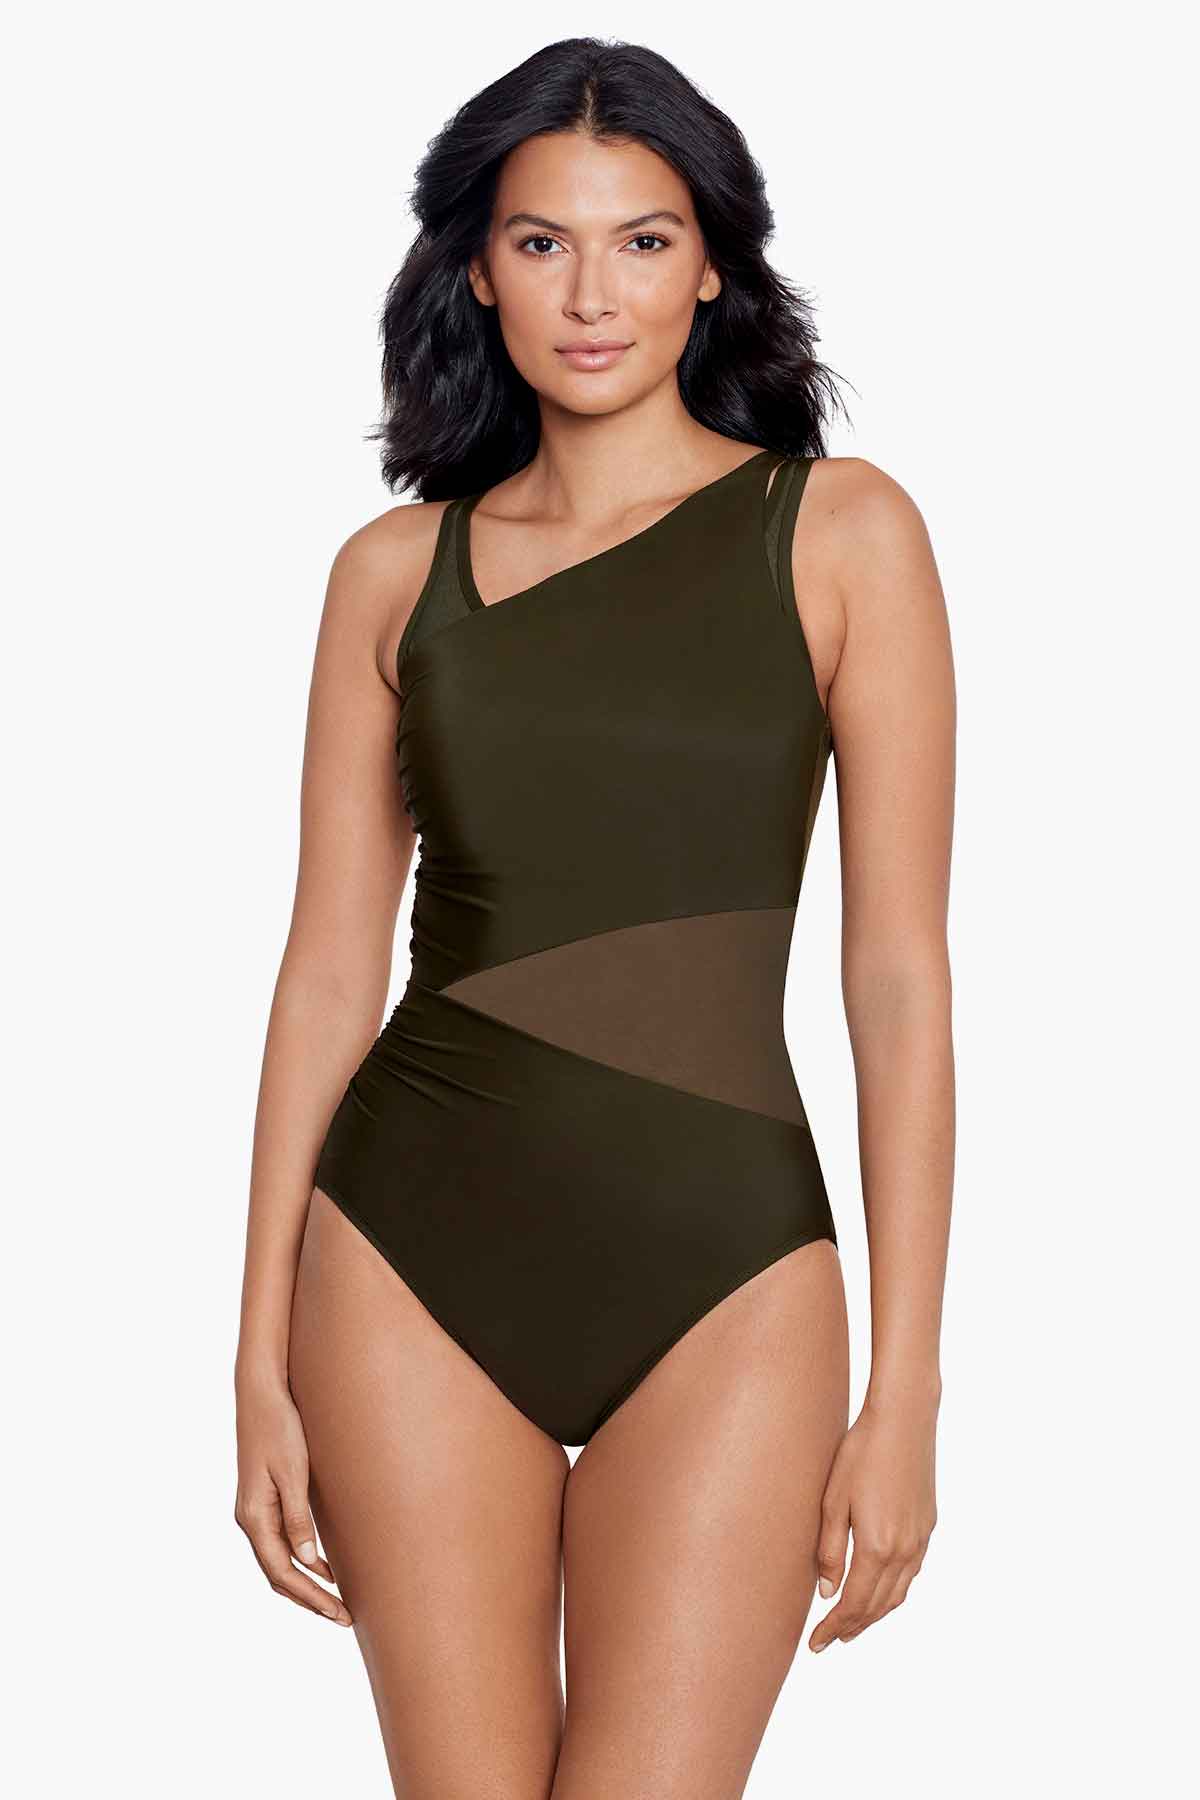 Spectra Somerland One Piece Swimsuit